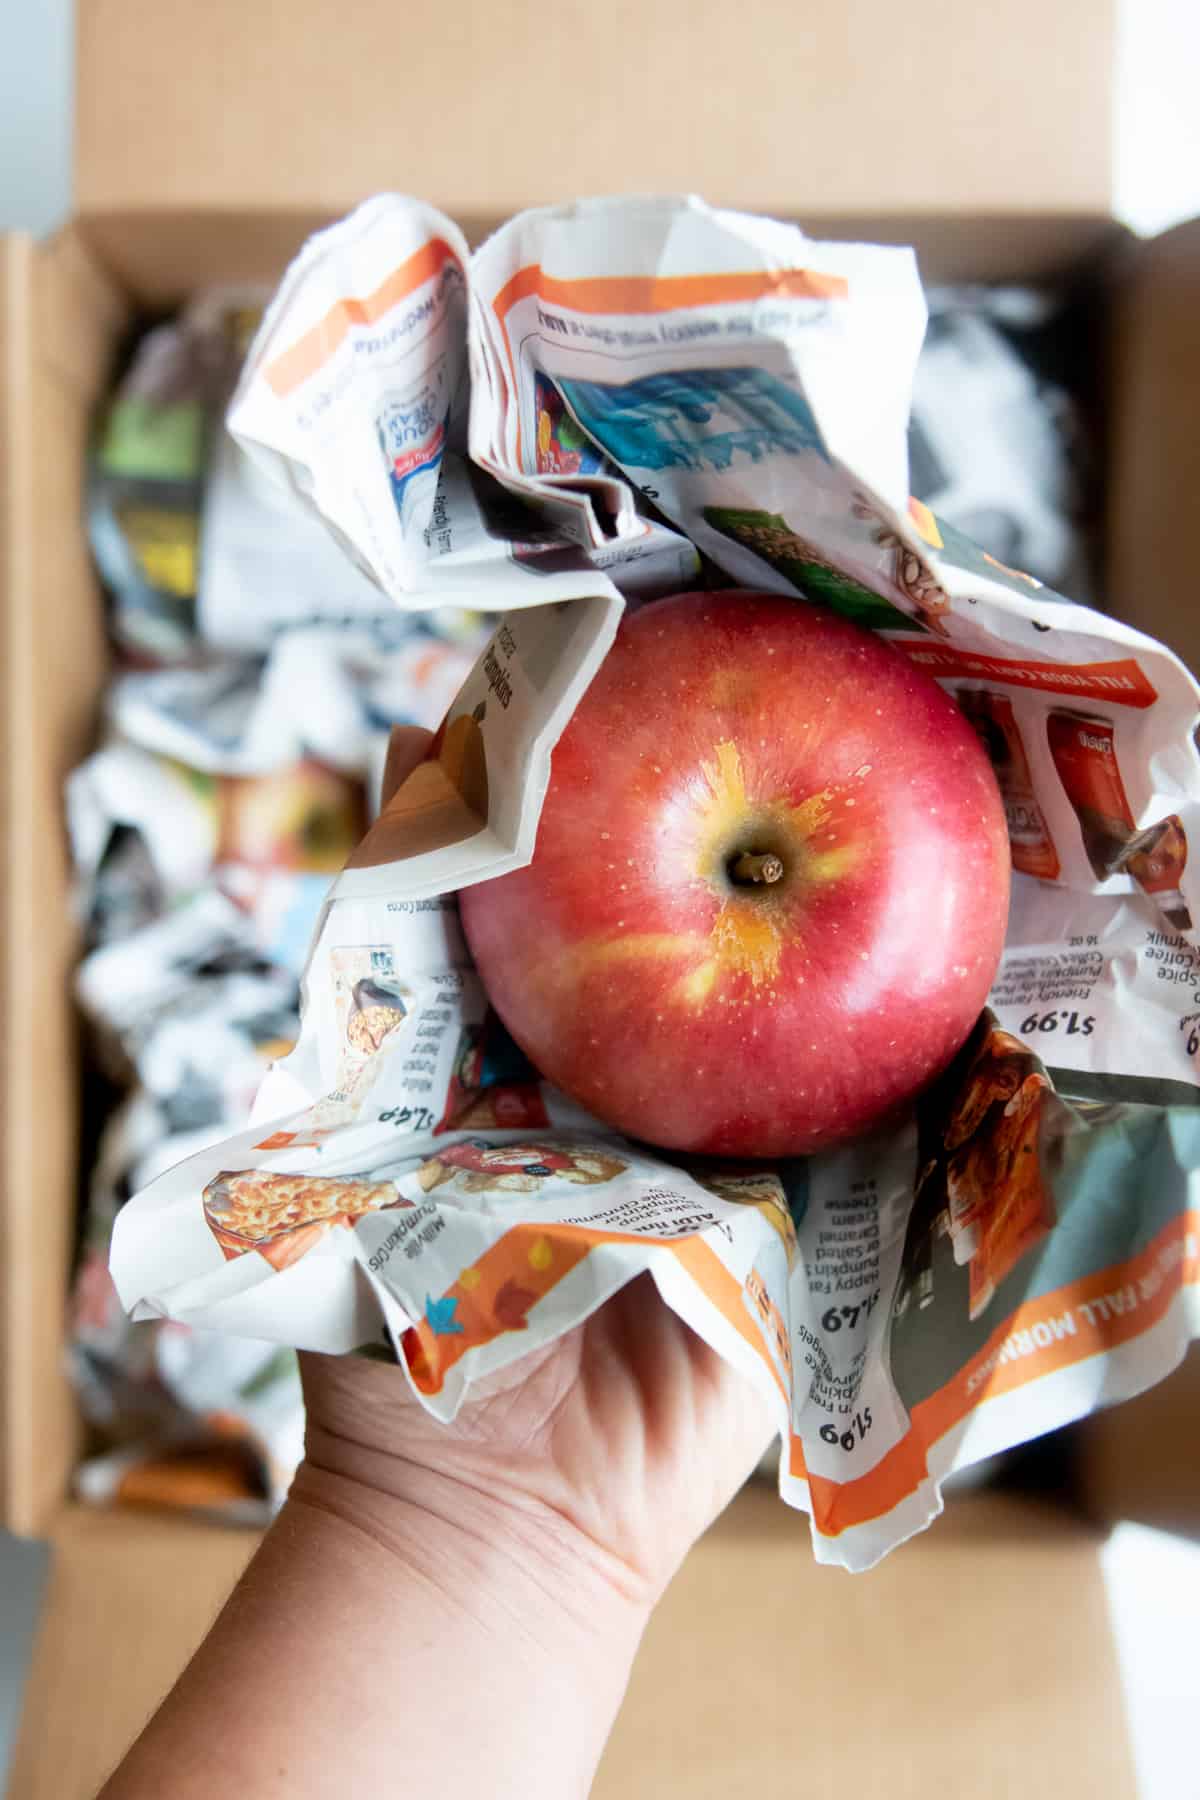 Red apple nestled in newspaper. A hand holds the apple over a cardboard box.